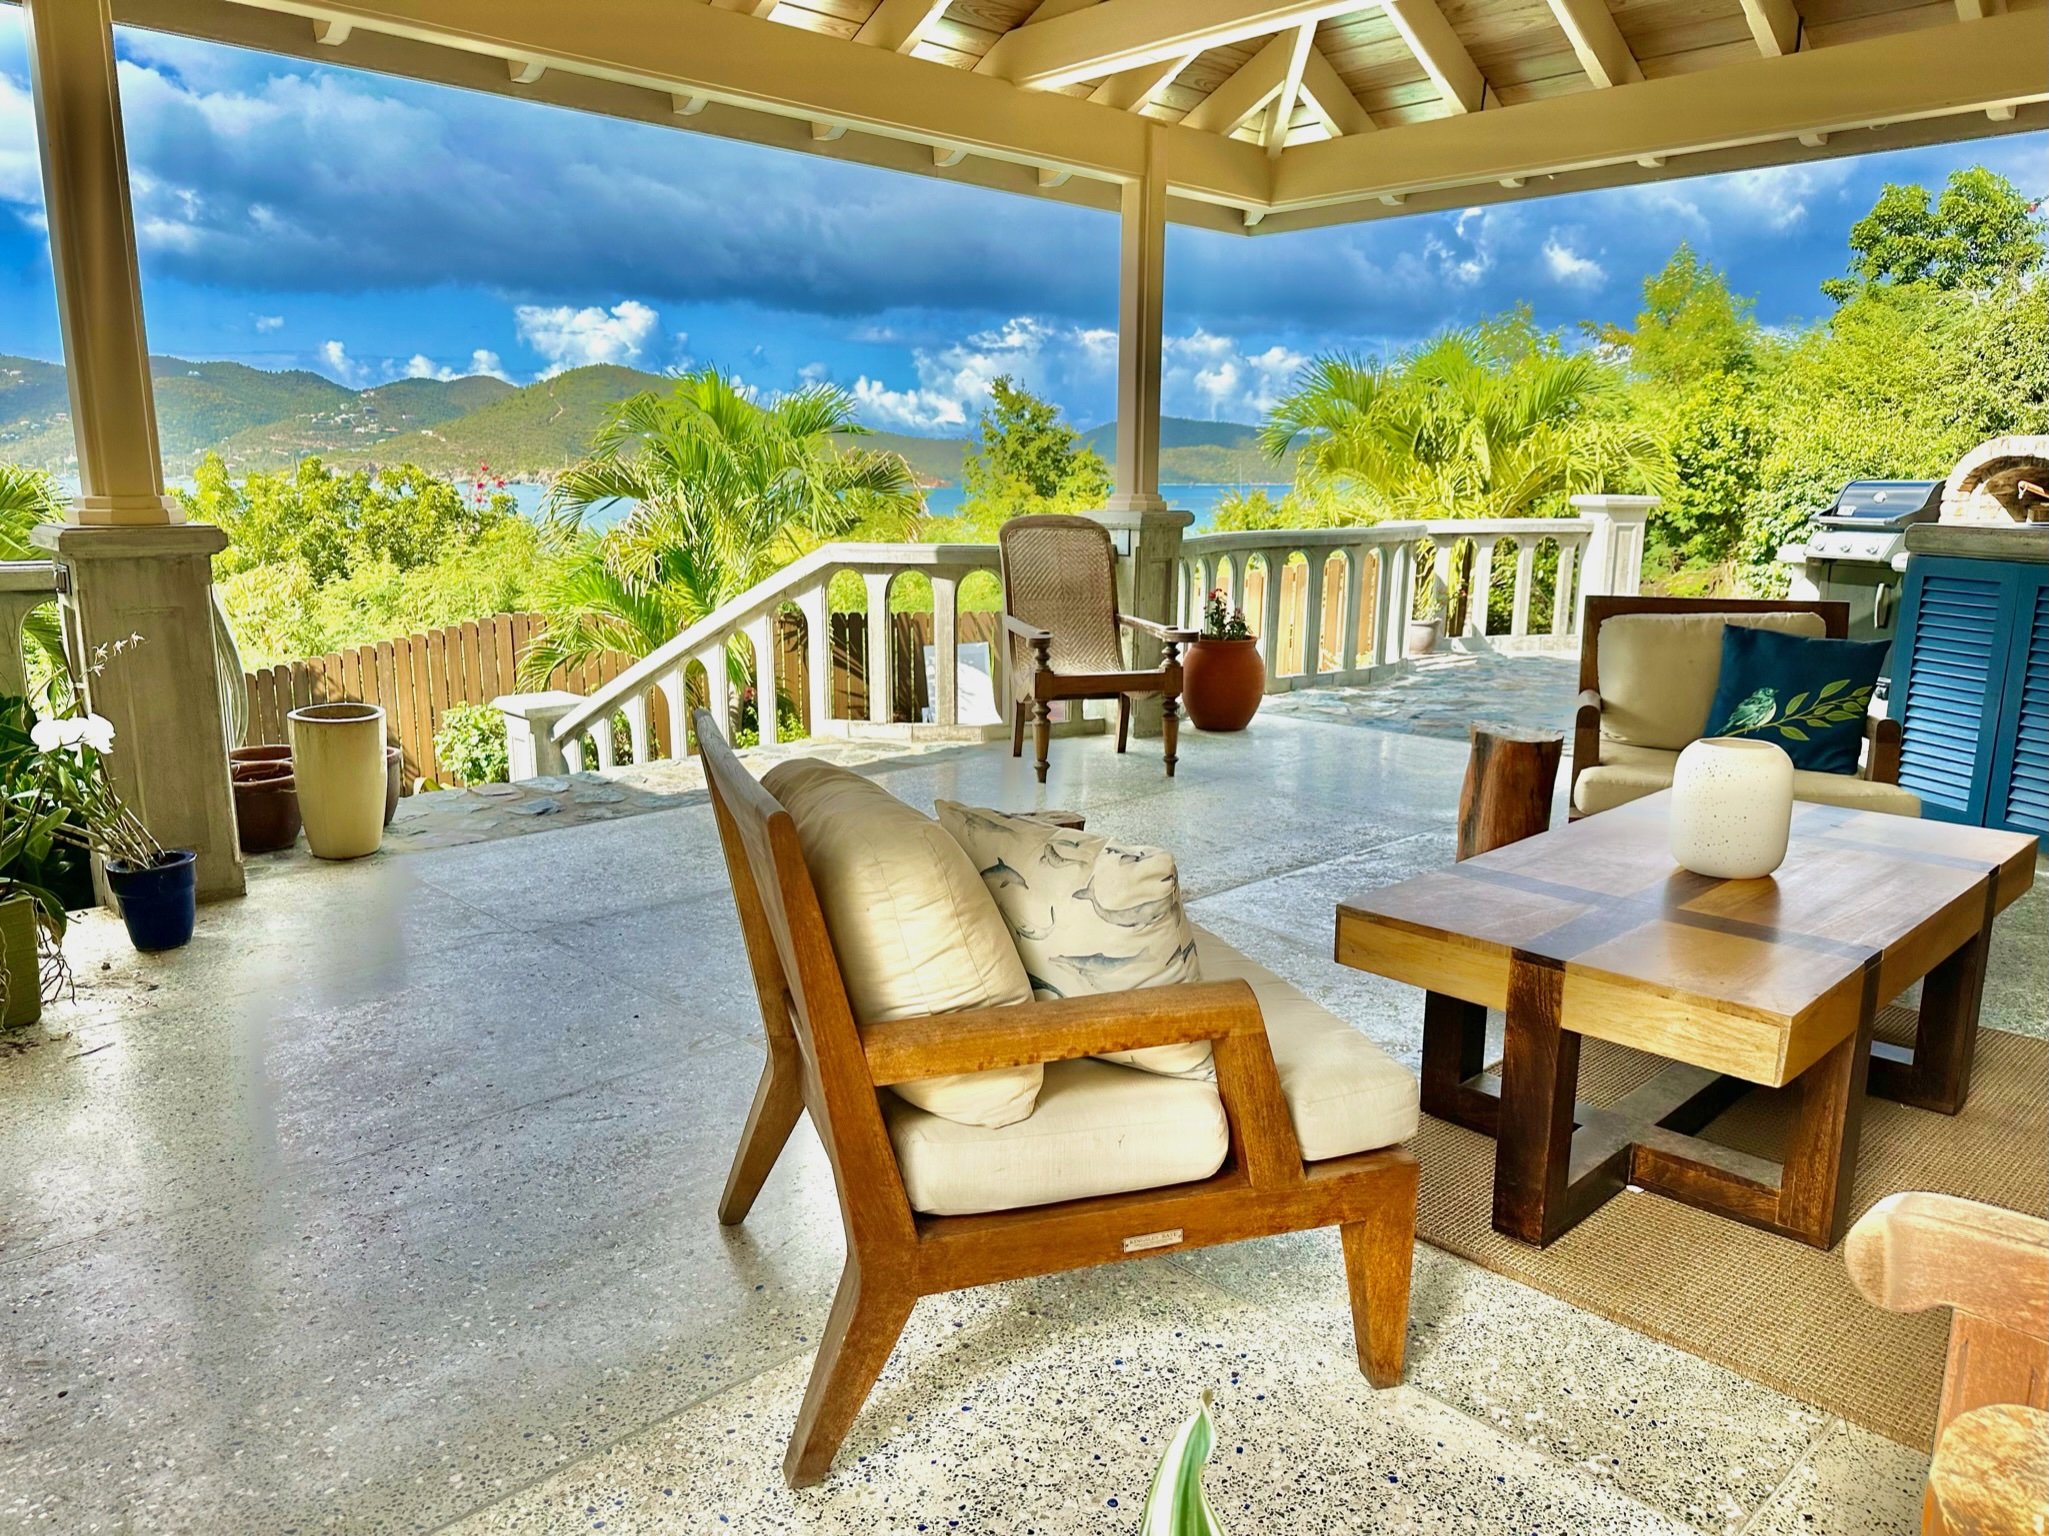 Main outdoor living space views to the islands beyond.JPG